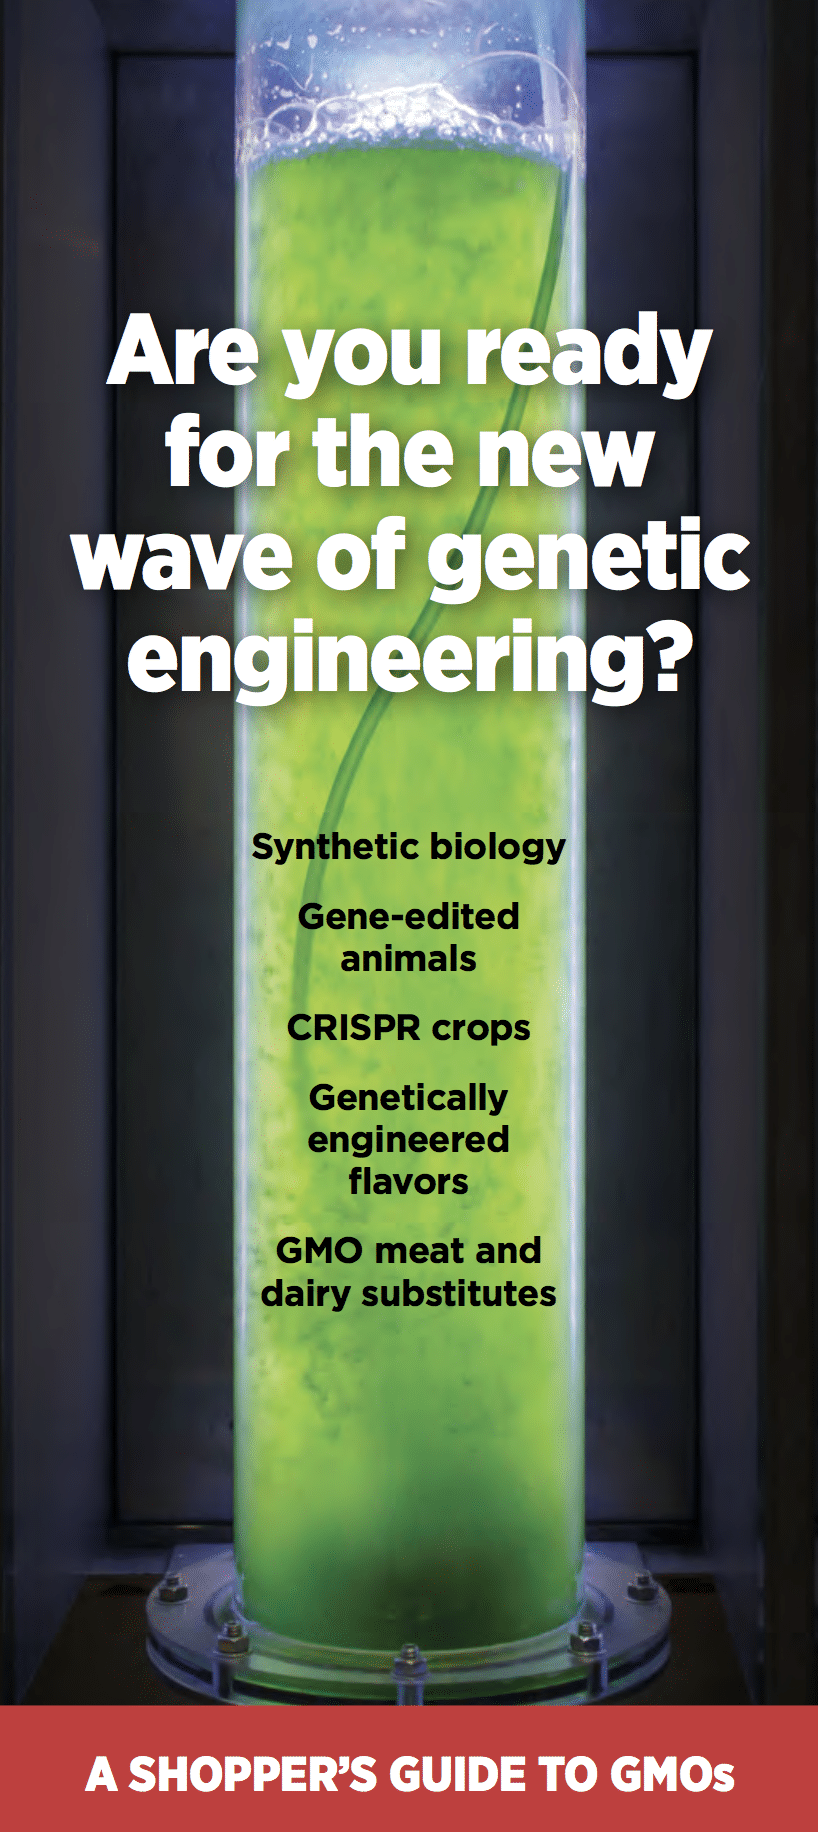 Shopper’s Guide to GMOs: Are You Ready For The New Wave of Genetic Engineering?